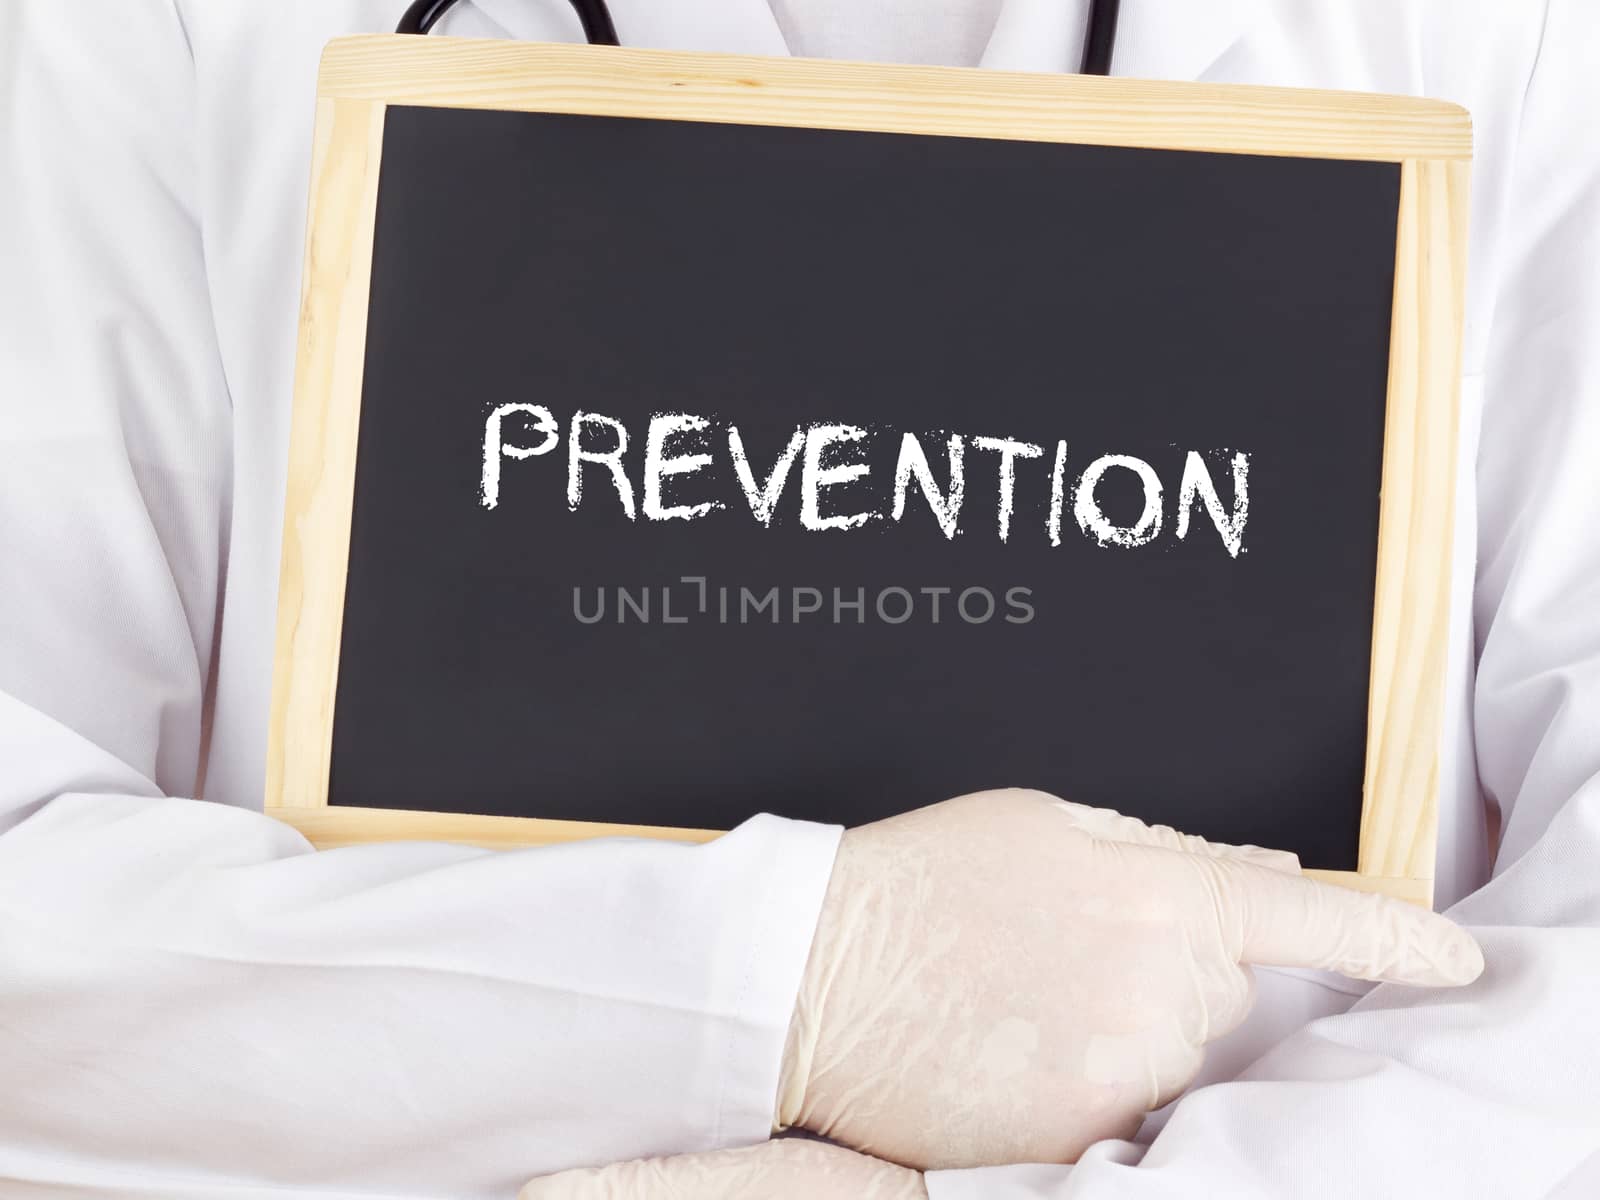 Doctor shows information on blackboard: prevention by gwolters